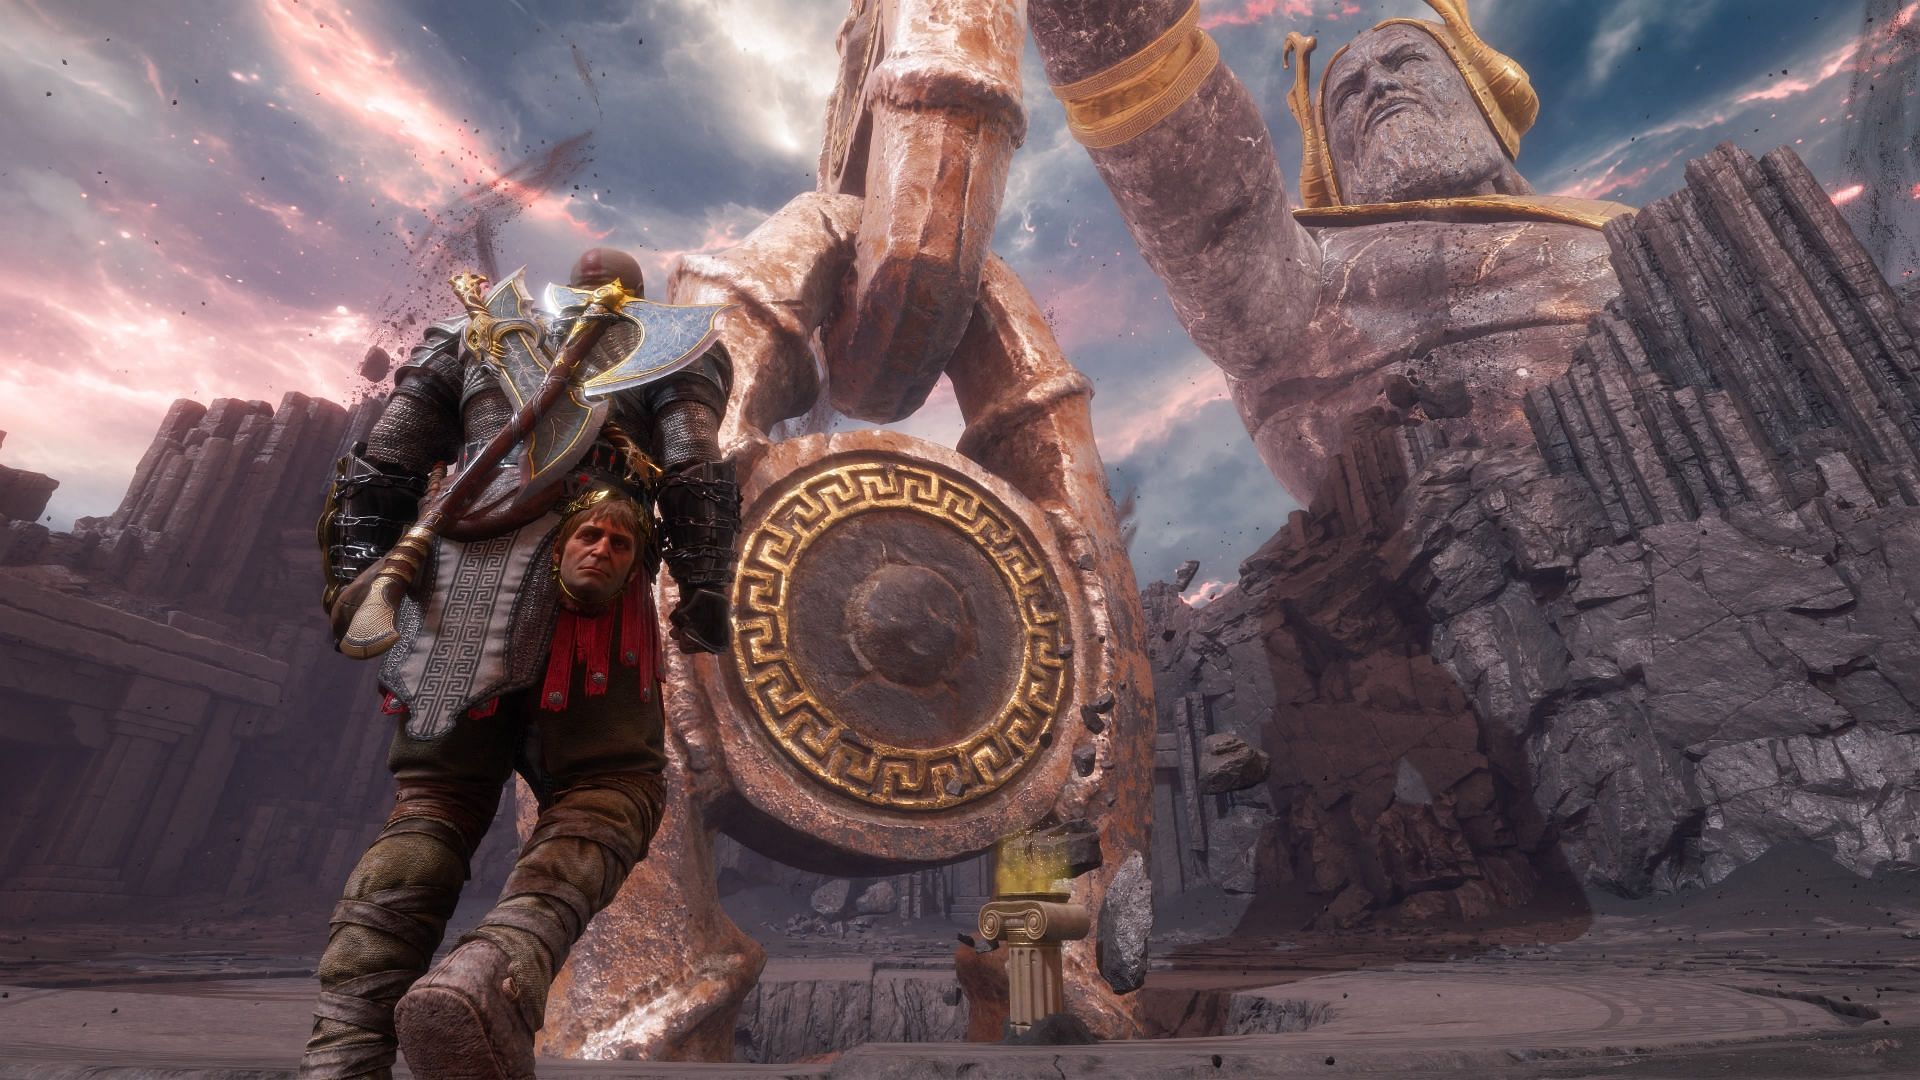 God of War Ragnarok Valhalla DLC is an excellent roguelike expansion for the base game, which also serves as the epilogue to Kratos